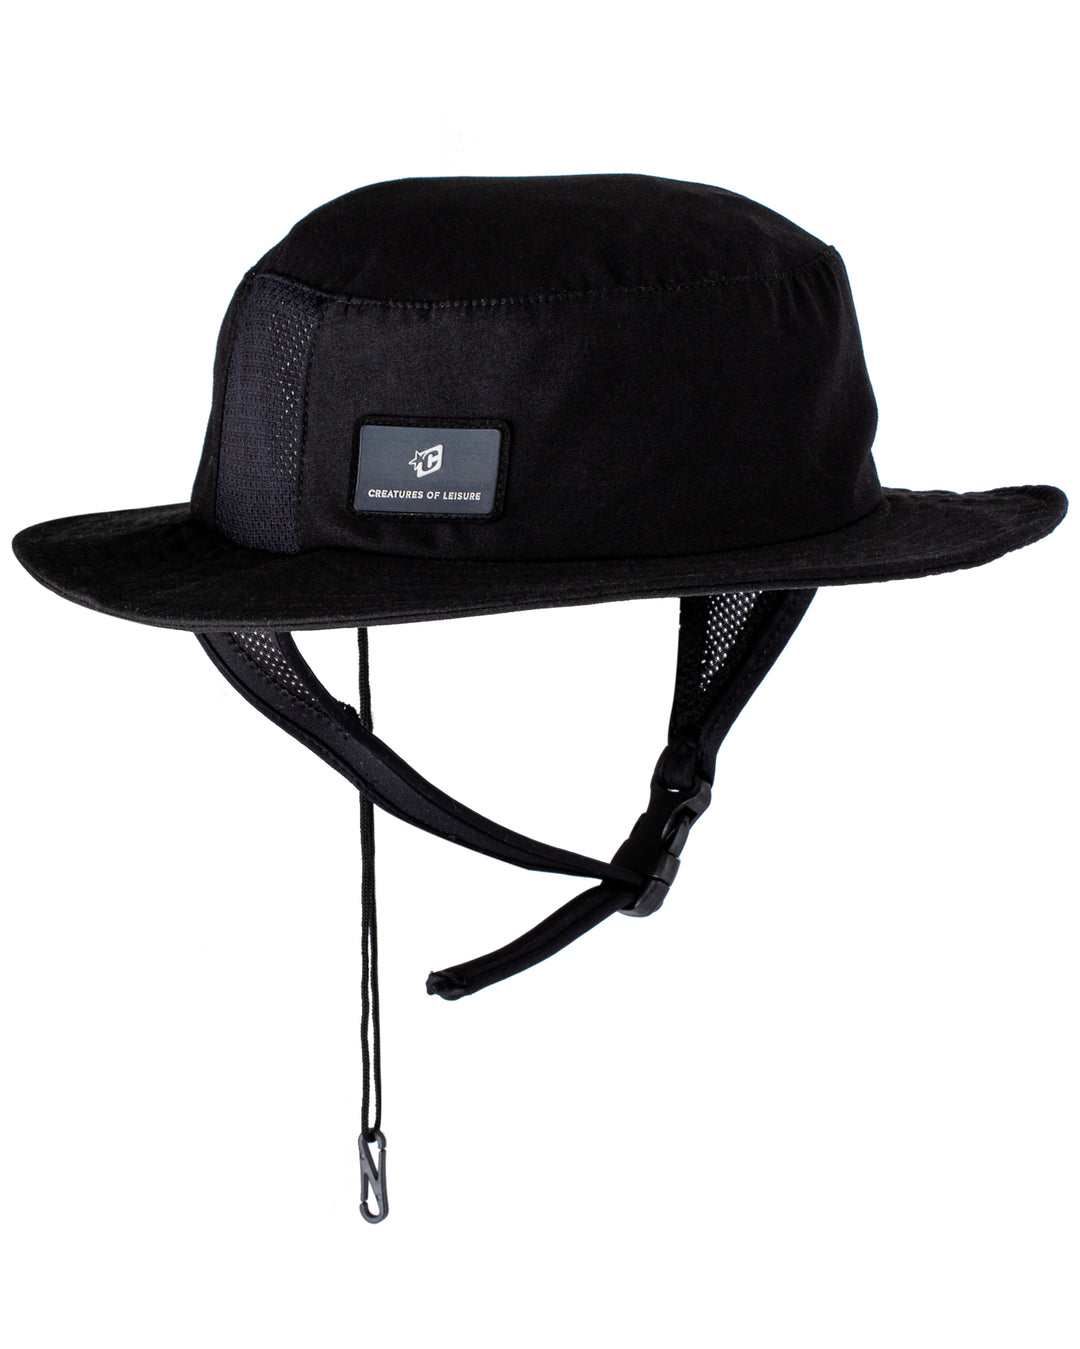 Moment Raindrop Patch Bucket Hat - Black, Moment Surf Company